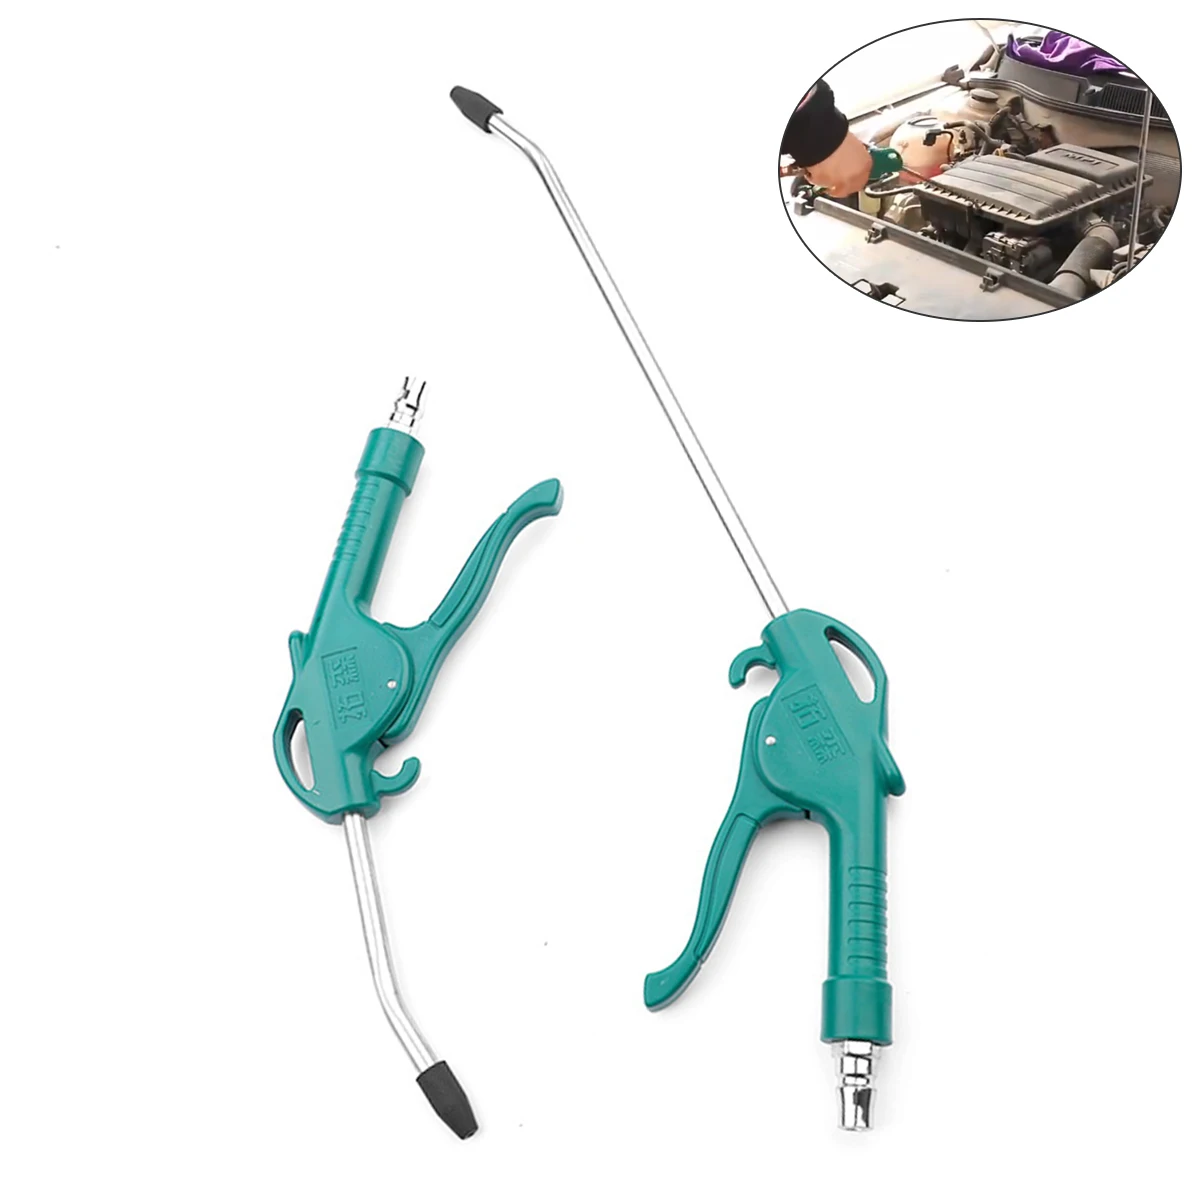 High-pressure Air Blow Gun Pistol Trigger Cleaner Compressor Dust Blower Nozzle Pneumatic Cleaning Tool for Other Machines 1pc step drill bit 3 16 1 2 step 4241 high speed steel for pistol bench iron steel pv plate drilling power tool accessories